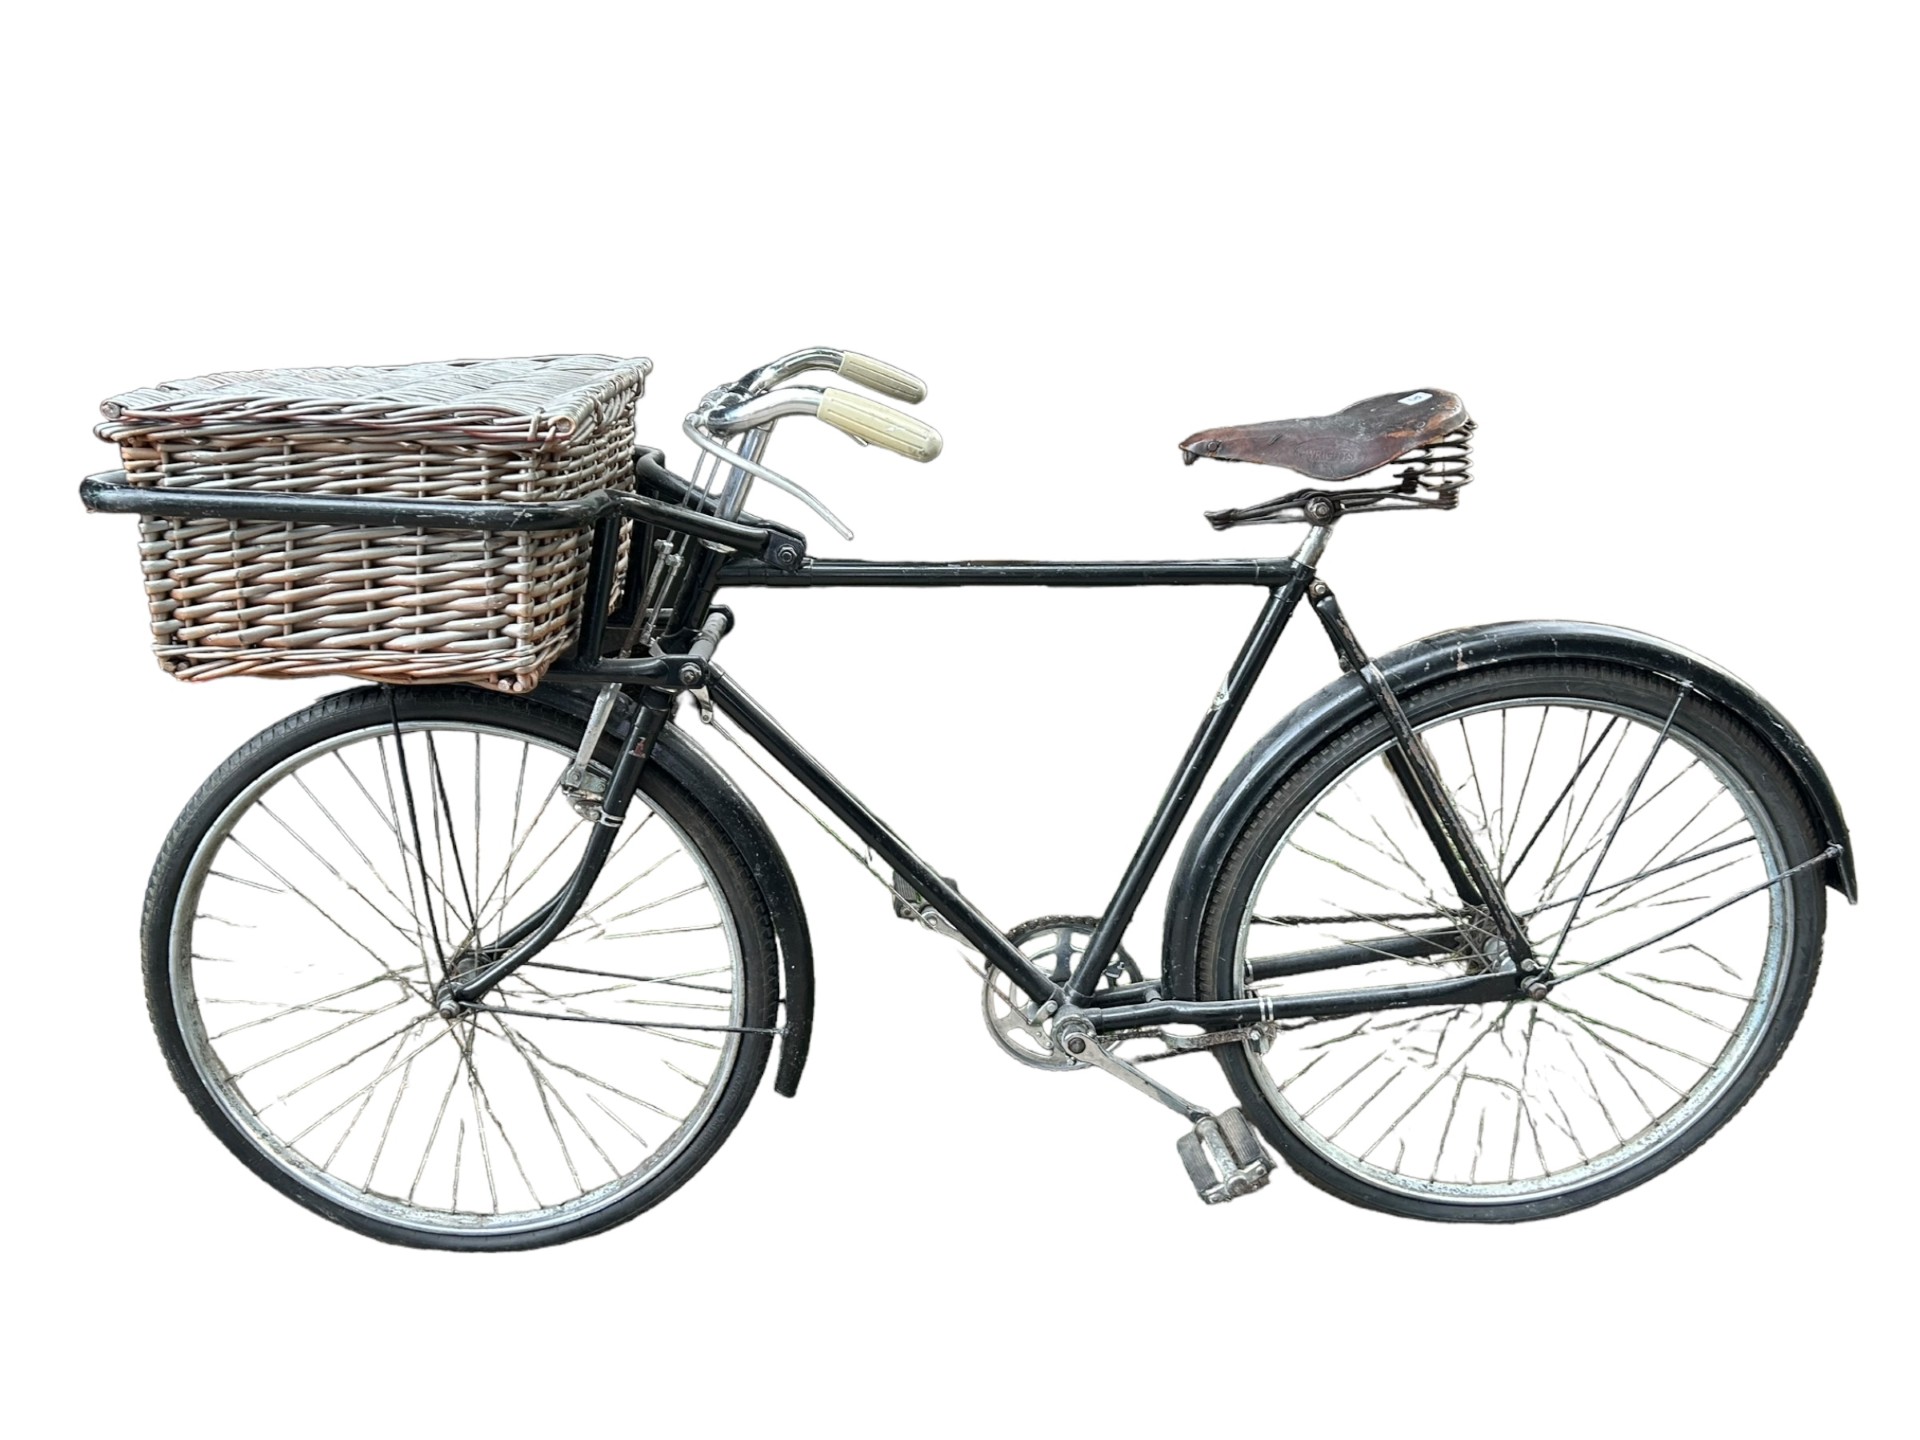 A VINTAGE RALEIGH BUTCHER’S BICYCLE With rod brakes and wicker basket.